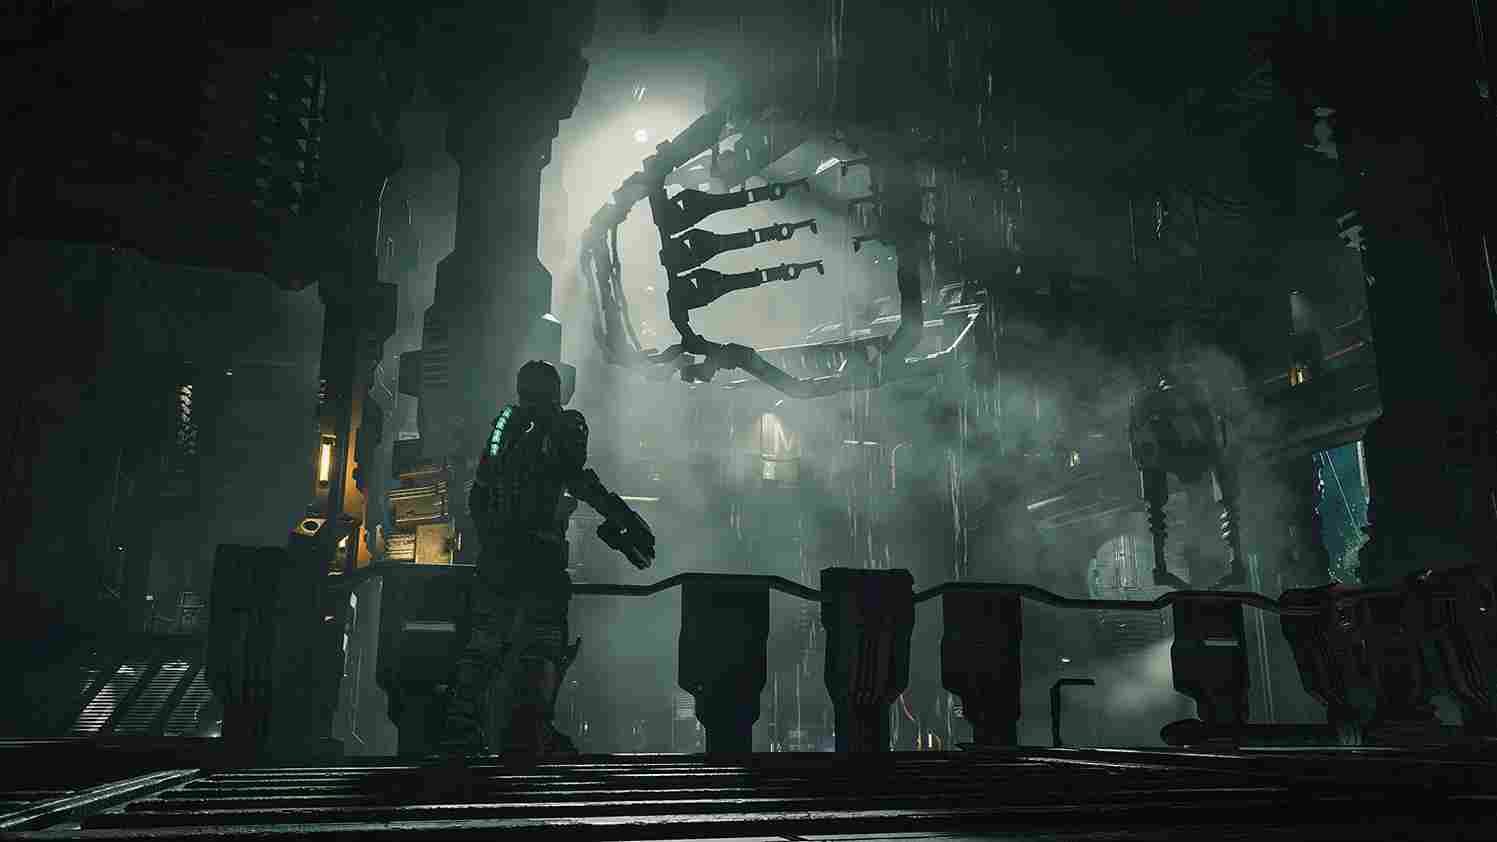 Dead Space Remake Multiplayer Mode Release Date When is it coming out